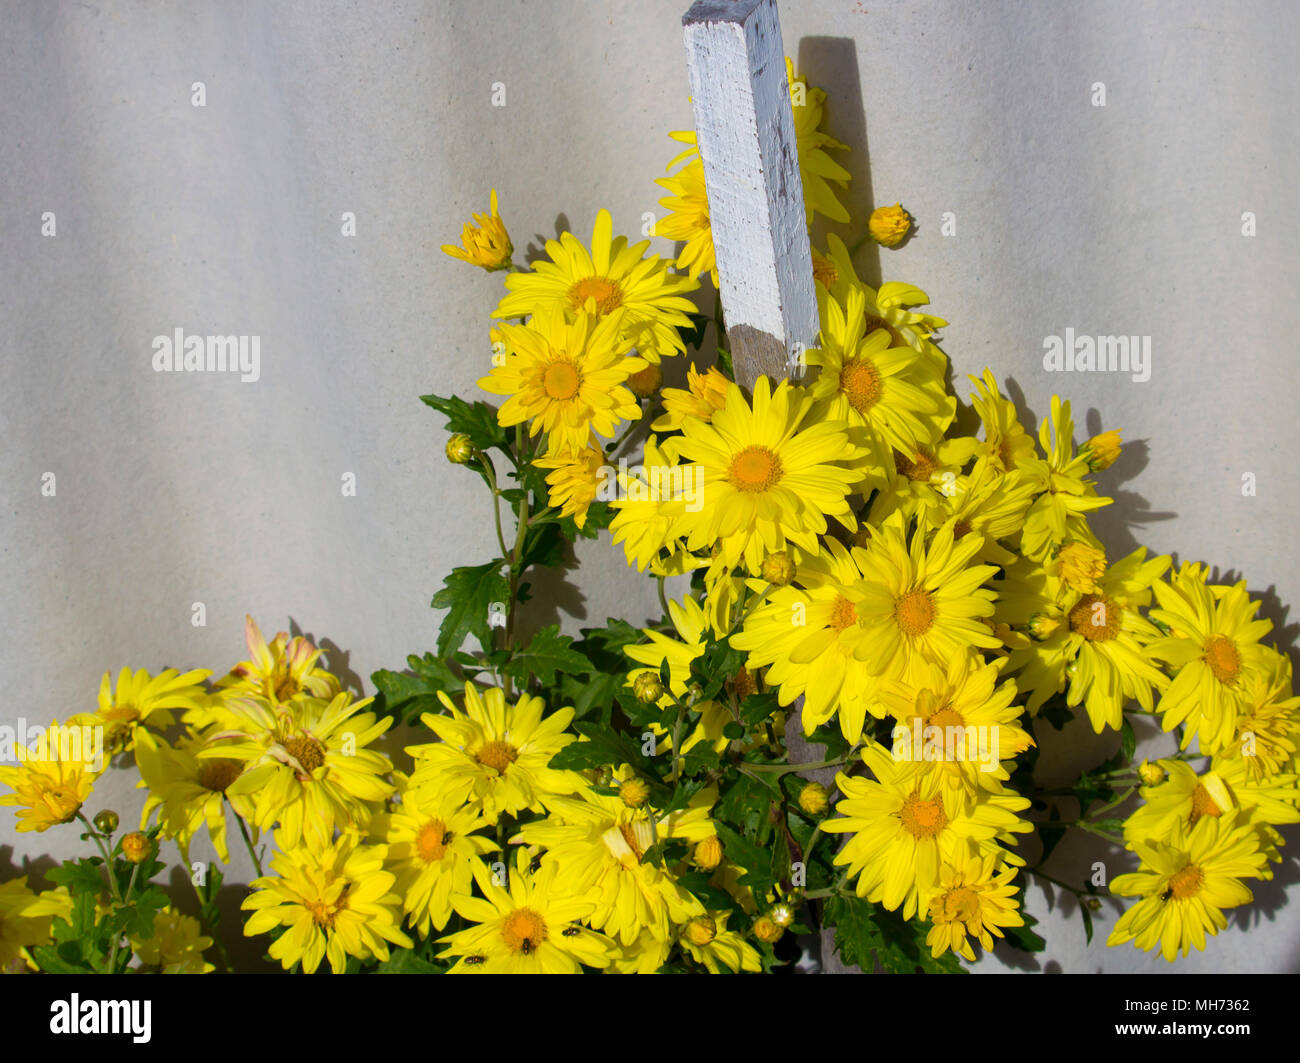 Chrysanthemums, mums or chrysanths,  yellow plants  of genus Chrysanthemum family Asteraceae   are used as a floral tribute to mums on mother's day. Stock Photo